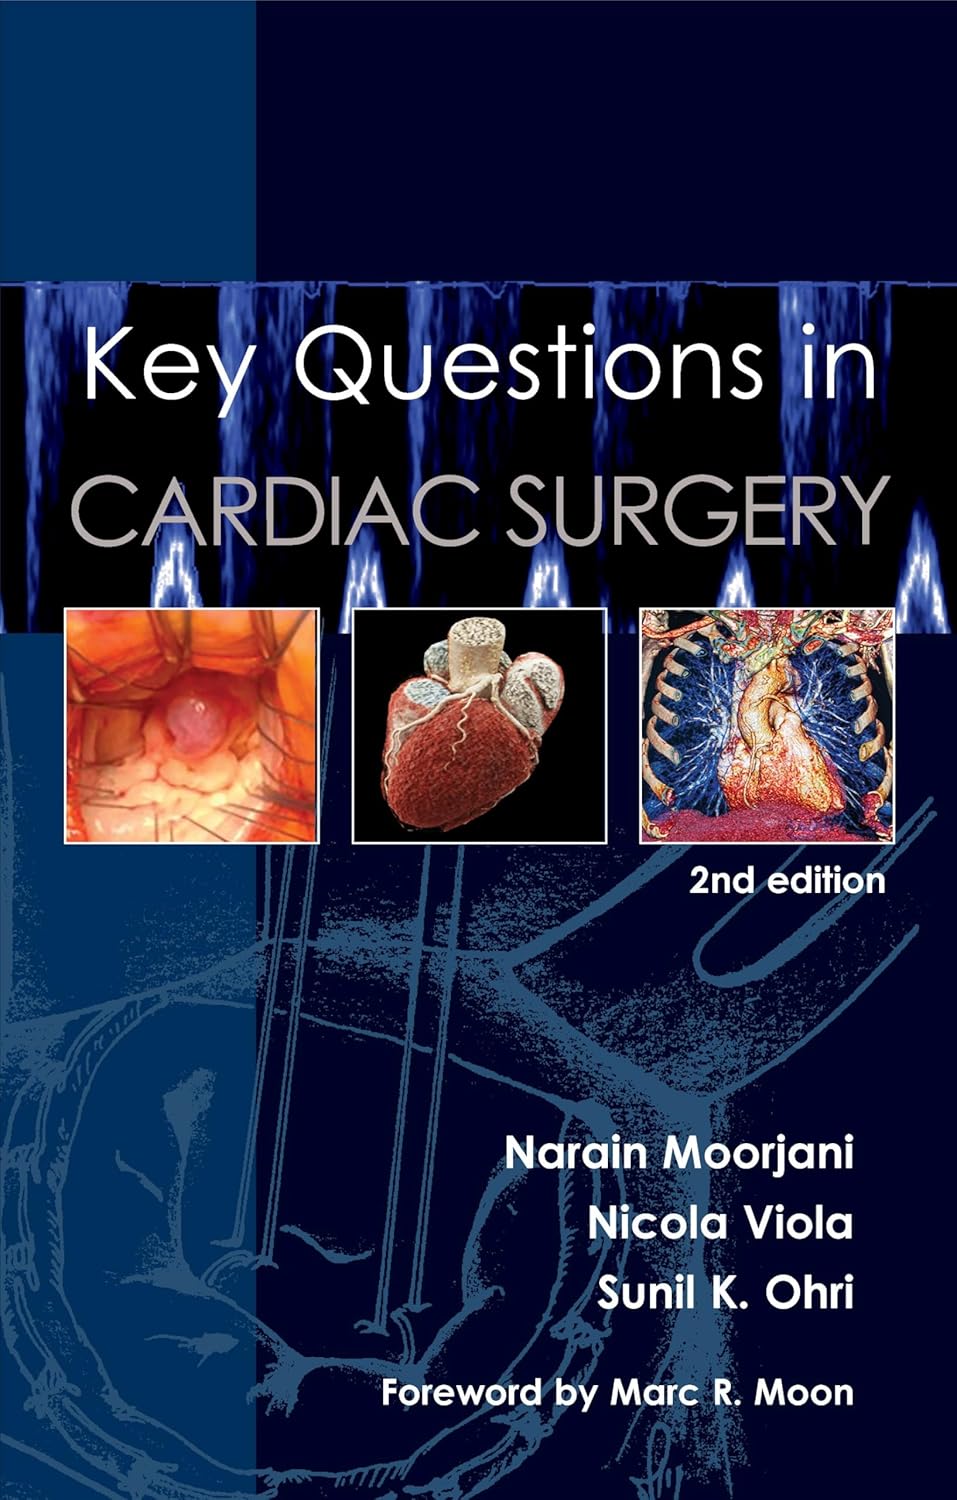 Key Questions in CARDIAC SURGERY, 2nd edition